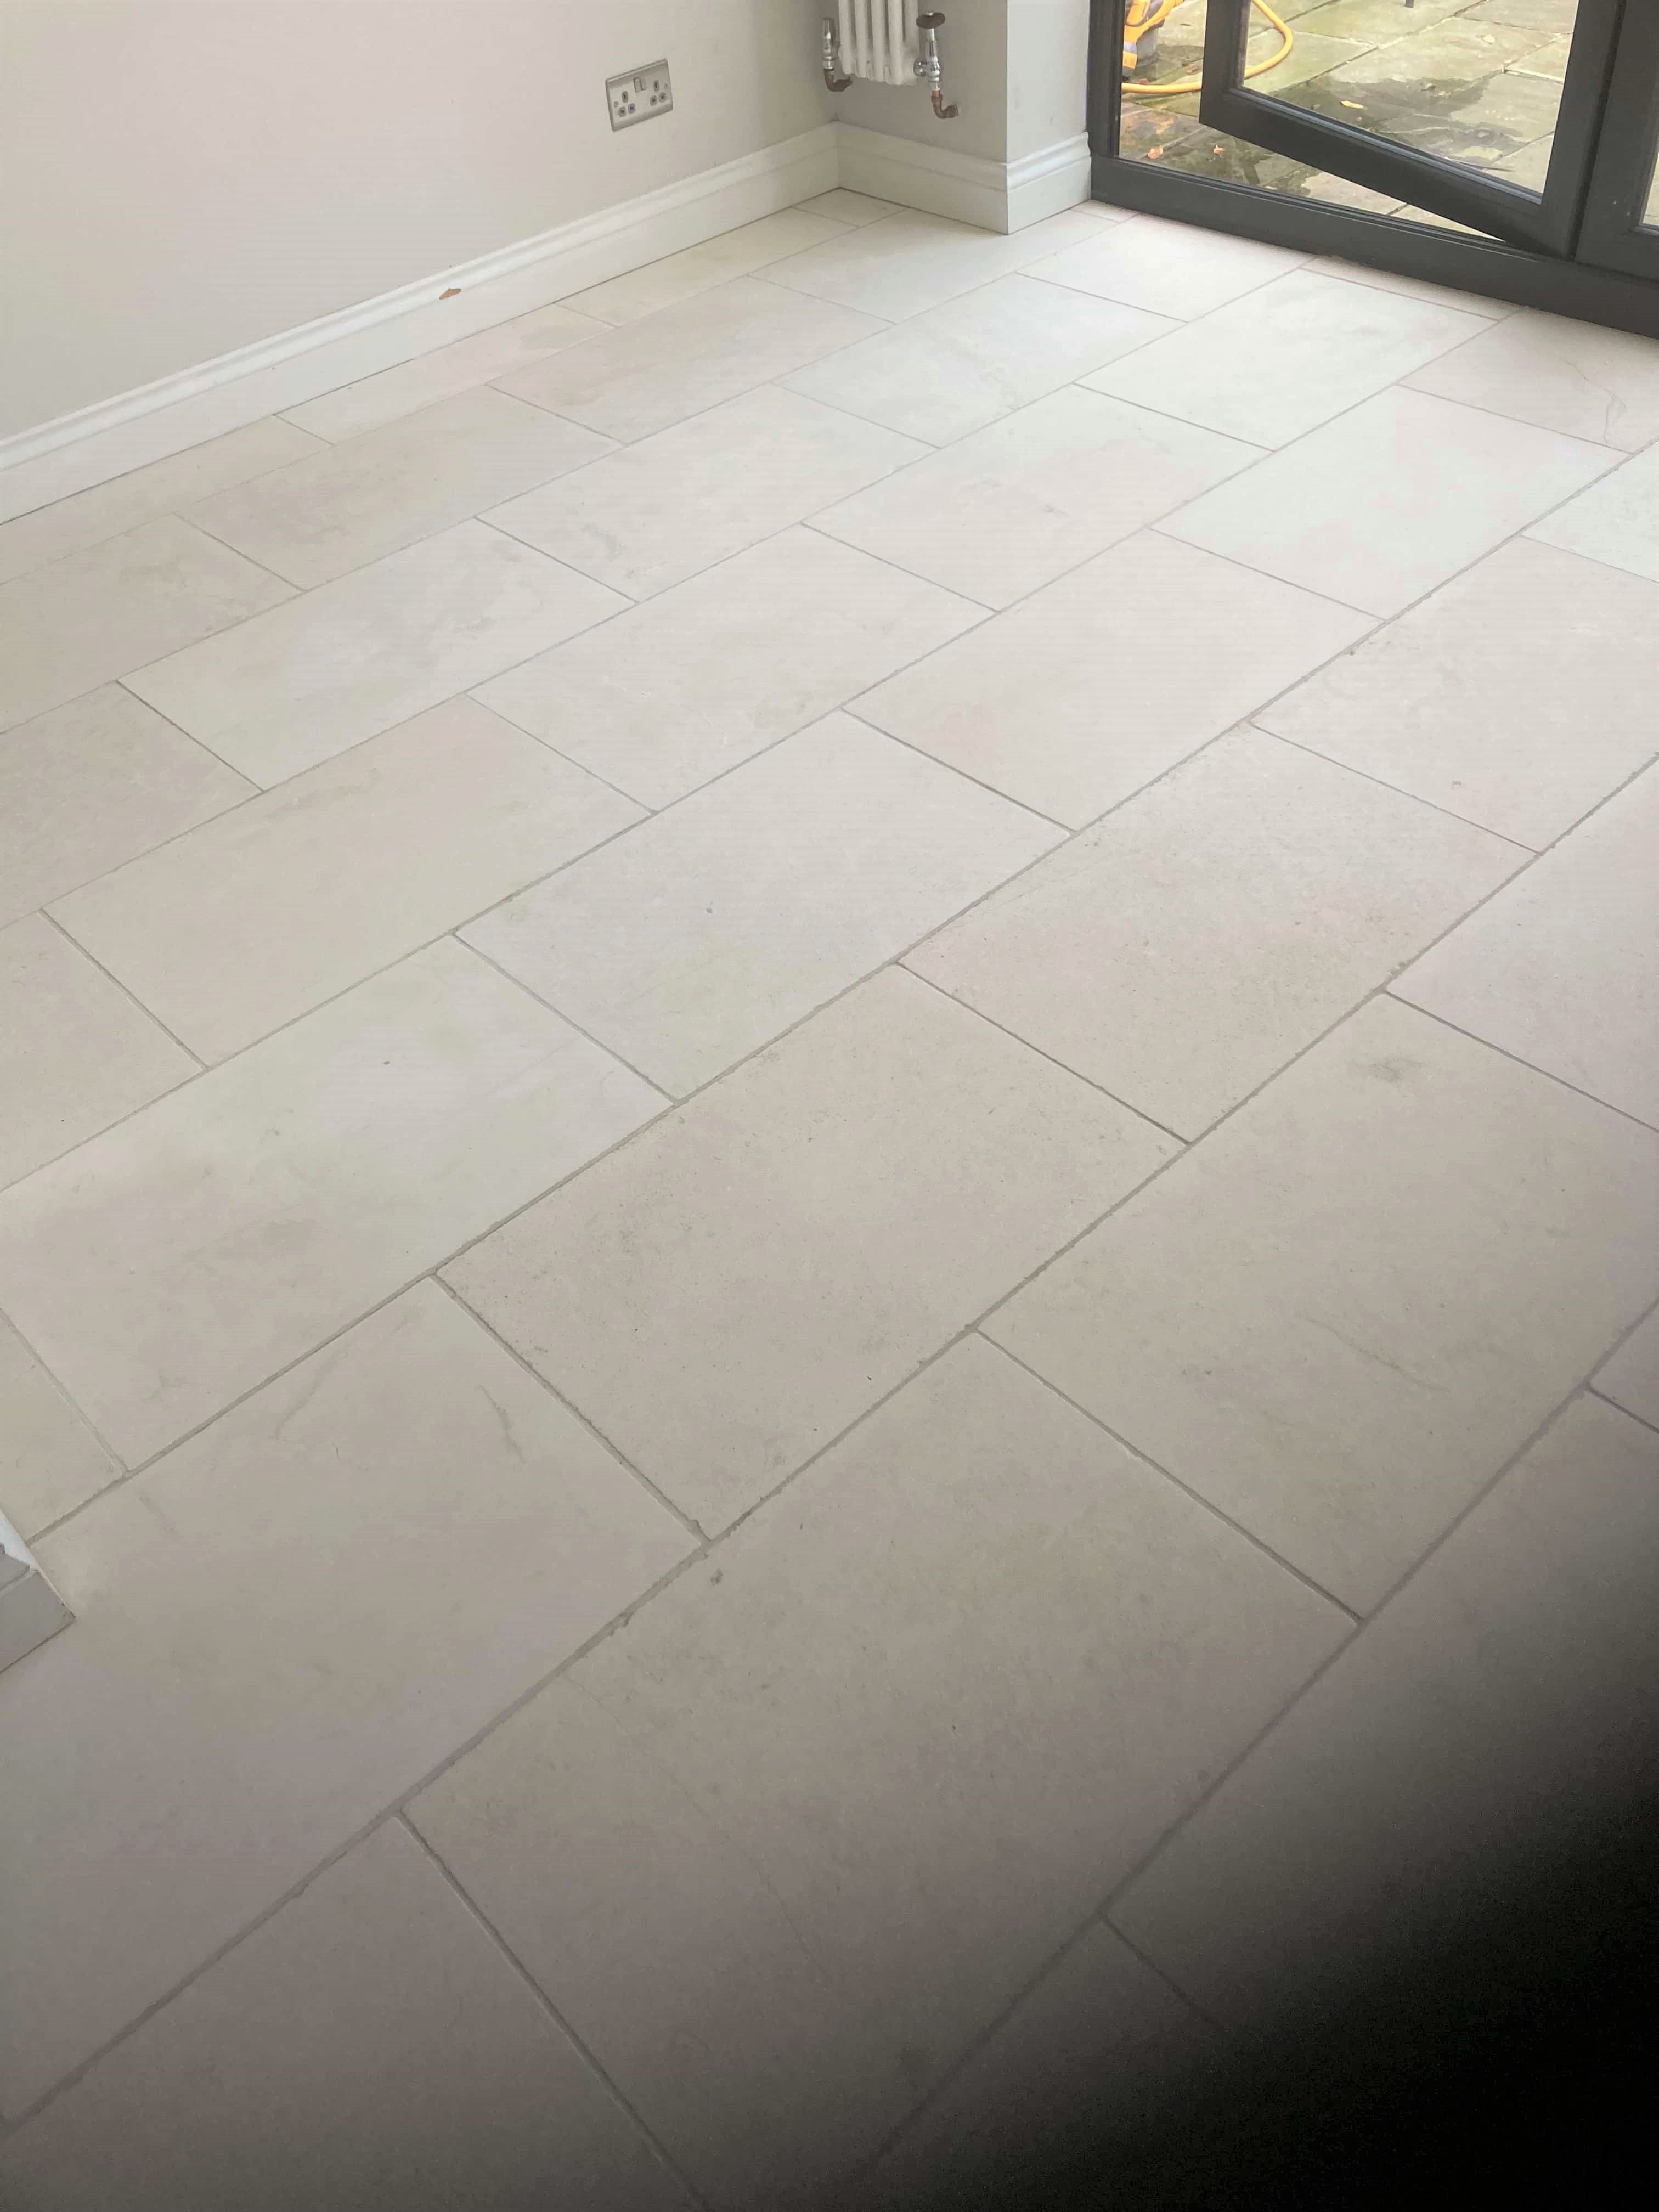 Limestone Floor After Cleaning Walton-on-Thames